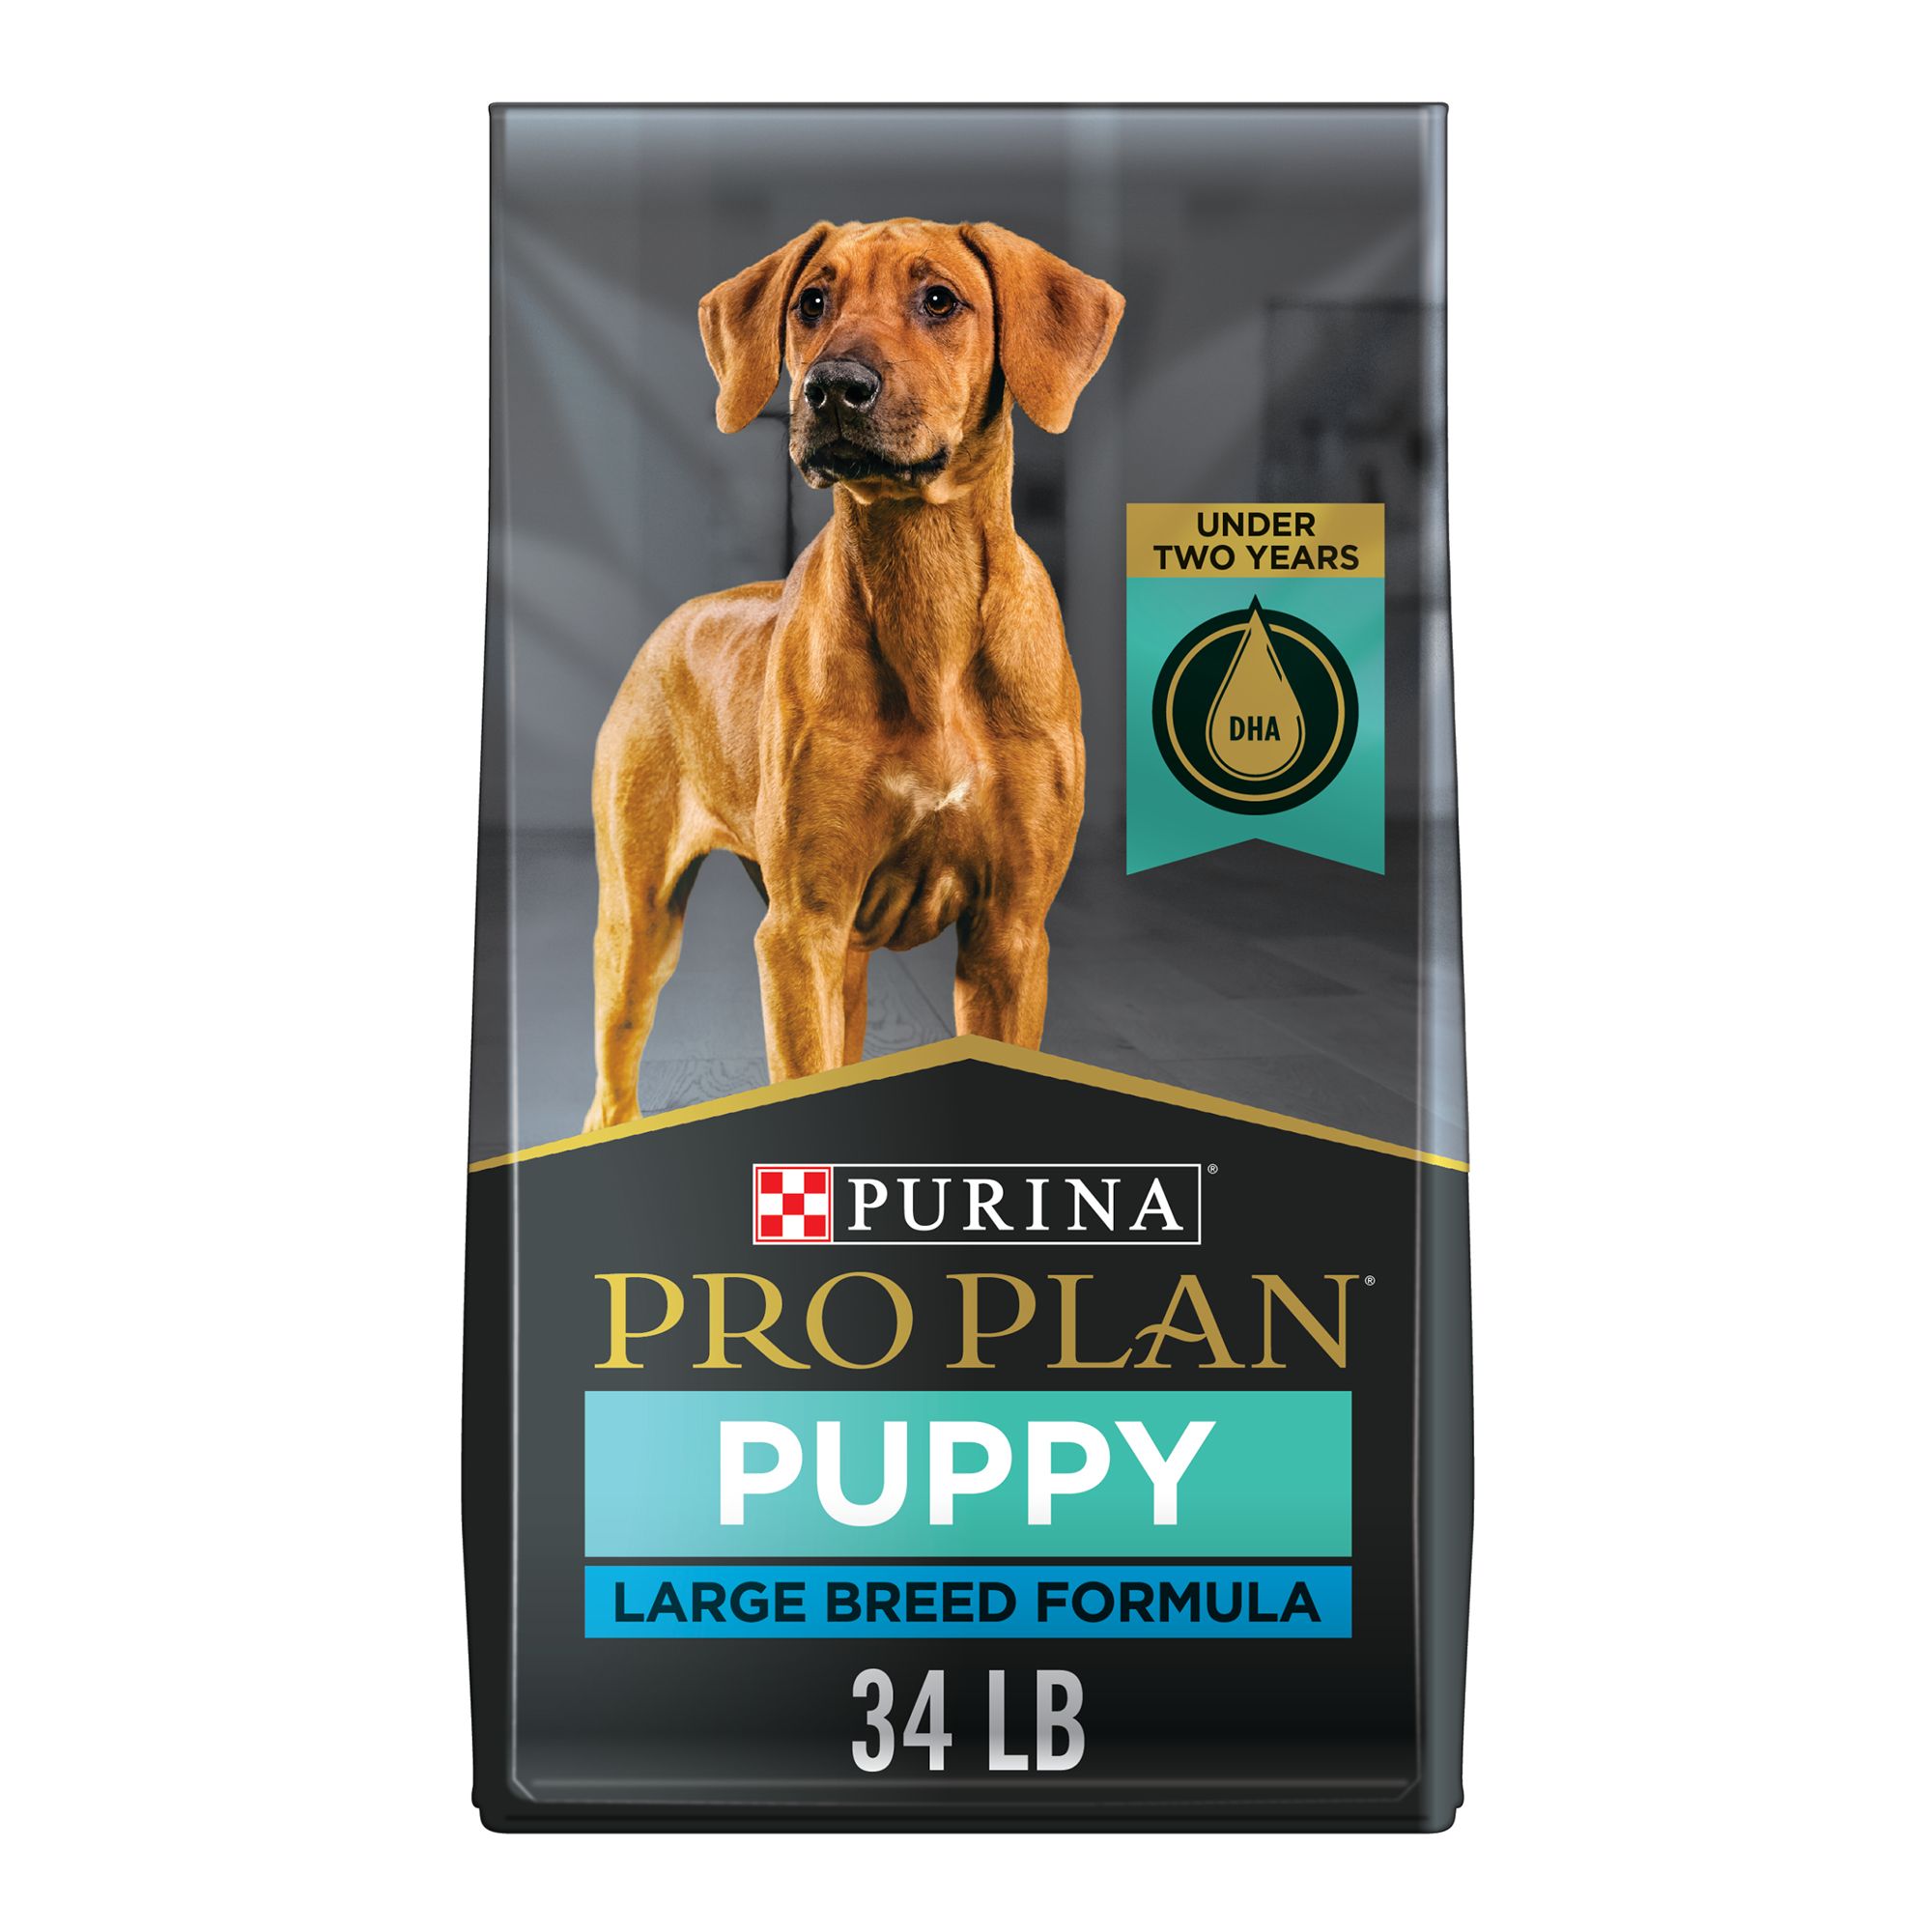 Purina Puppy Chow Large Breed Serving Size